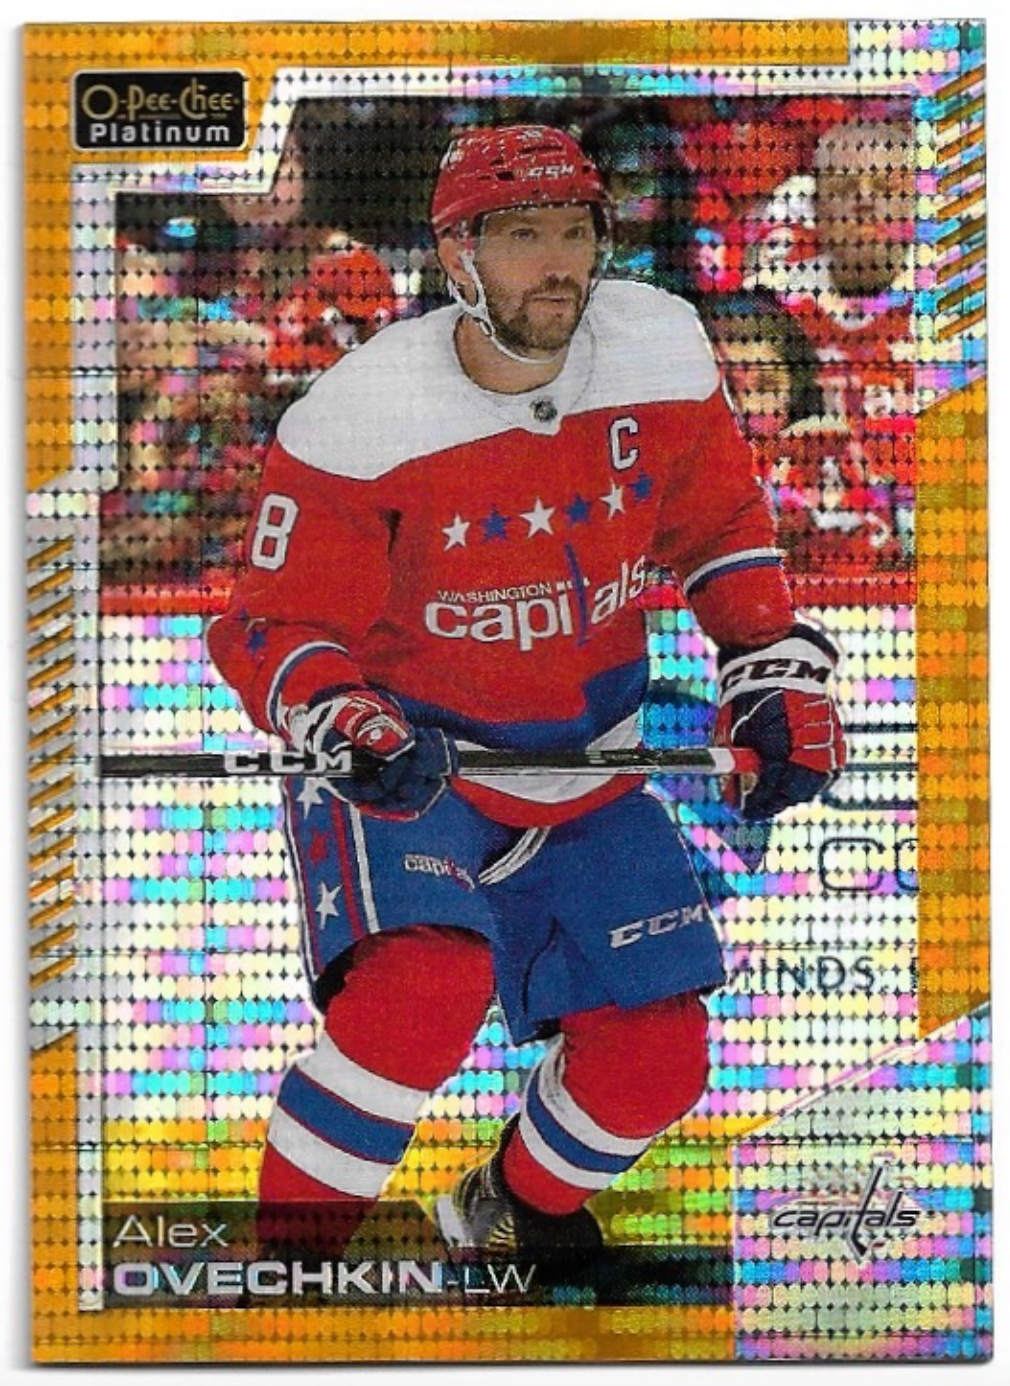 Seismic Gold ALEX OVECHKIN 20-21 UD O-Pee-Chee OPC Platinum /50